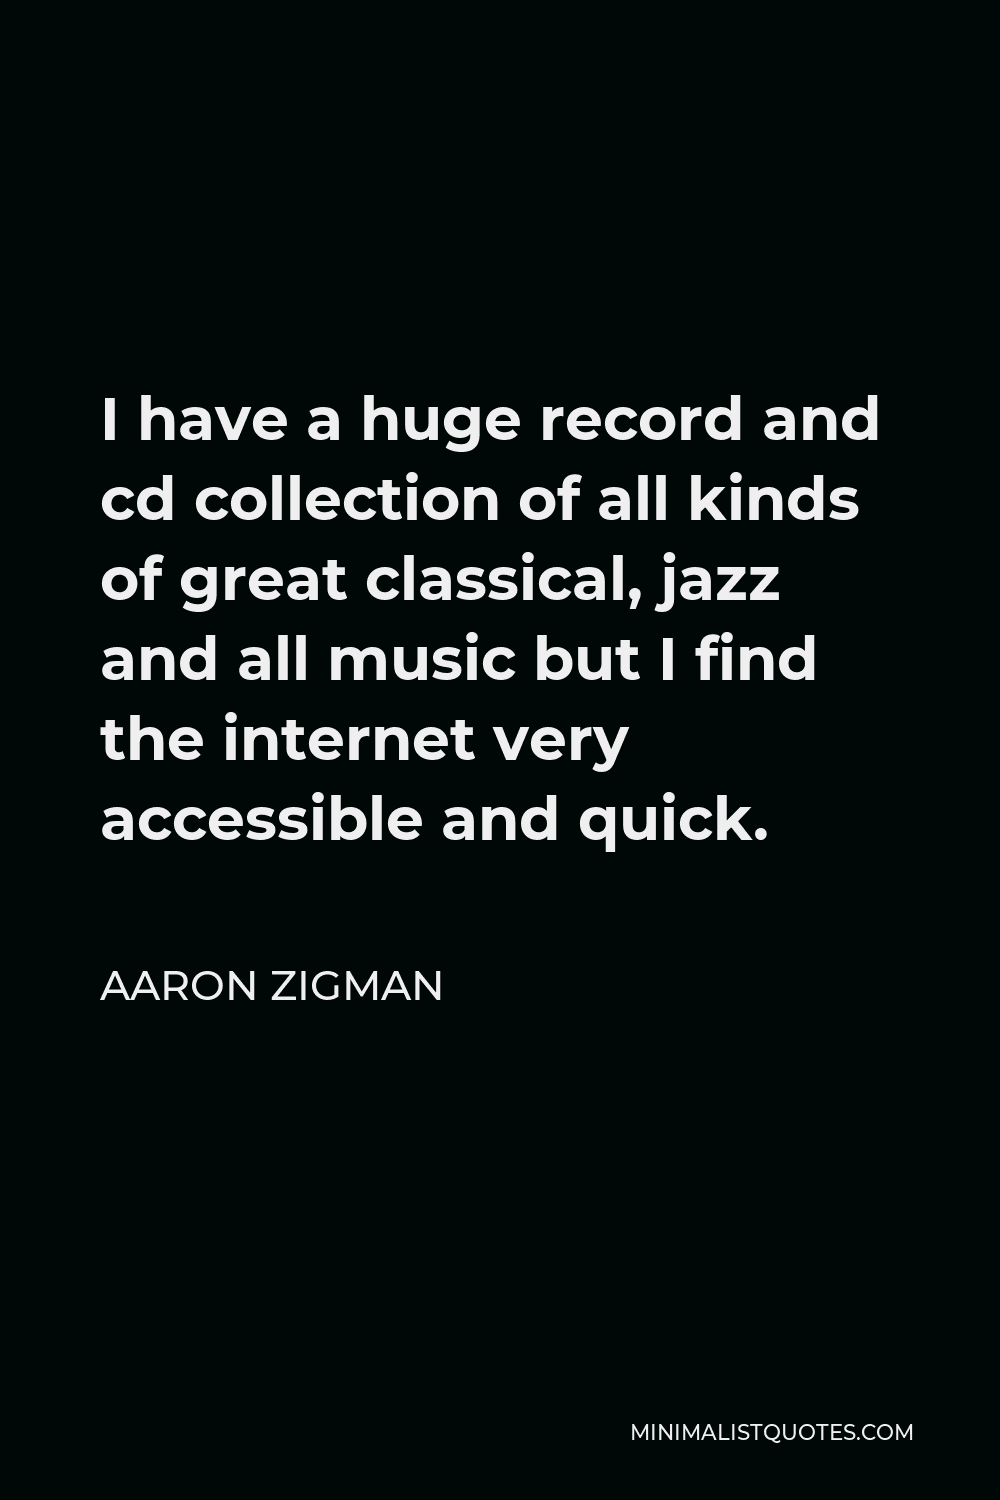 Aaron Zigman Quote - I have a huge record and cd collection of all kinds of great classical, jazz and all music but I find the internet very accessible and quick.